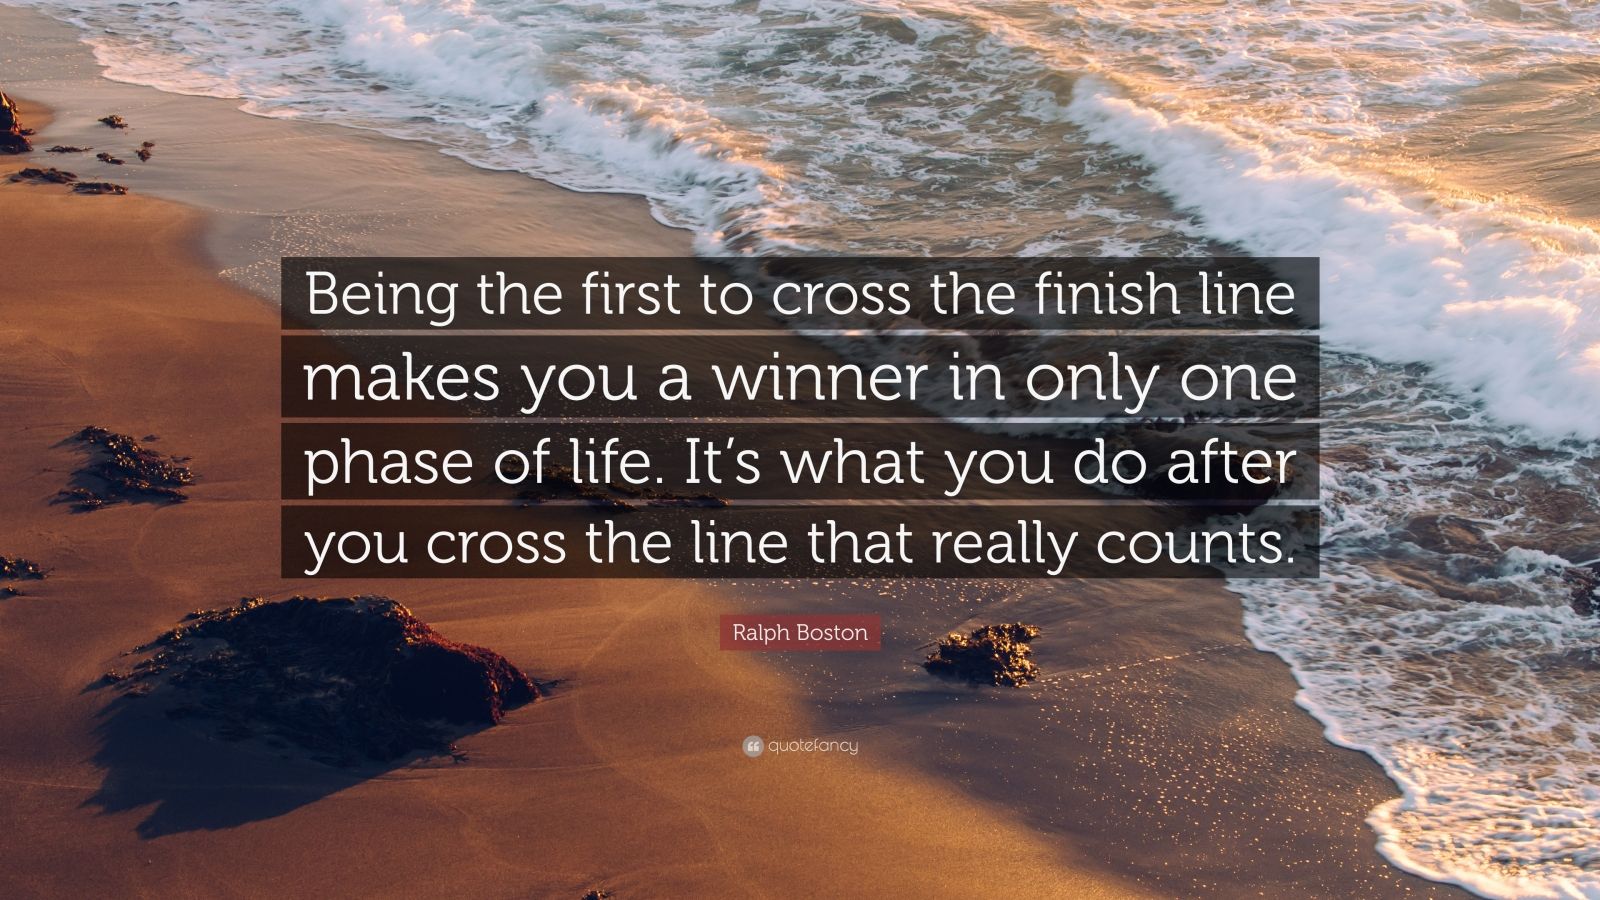 Ralph Boston Quote “Being the first to cross the finish line makes you